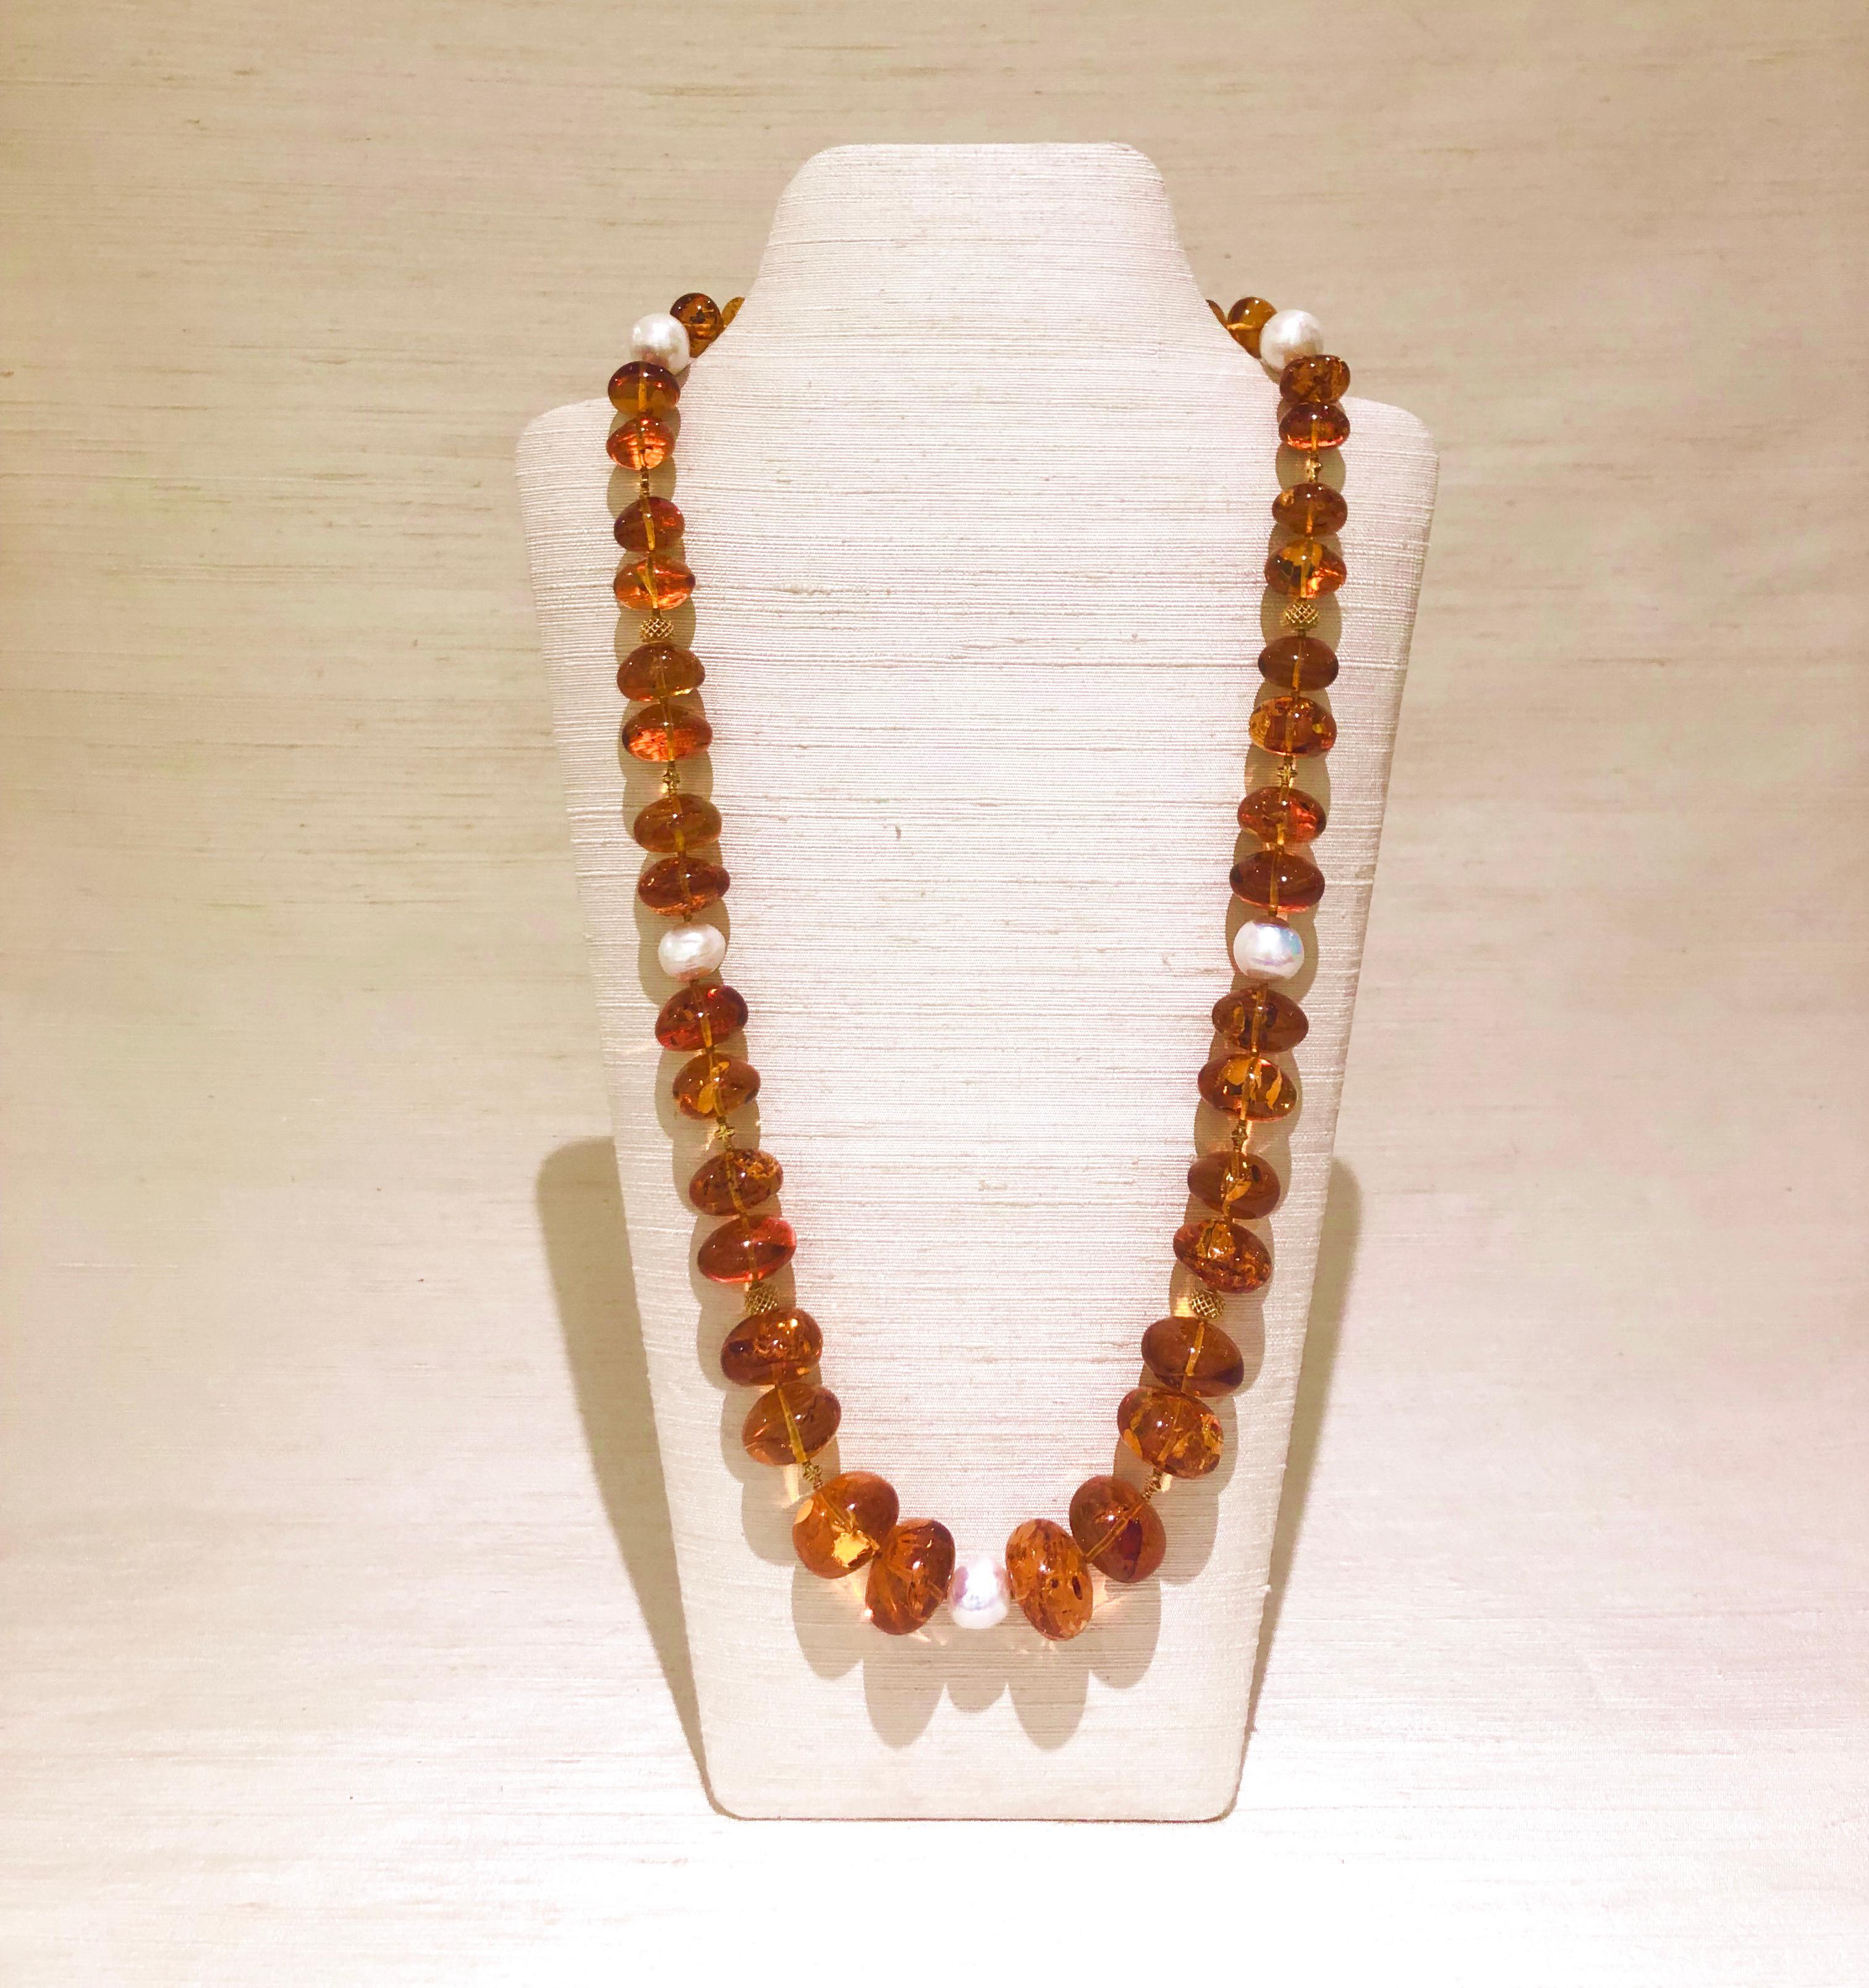 This charming long necklace of large graduated Baltic honey amber beads is mixed with Baroque Fresh Water Pearls and handcrafted Indian 18 karat decorative gold beads with an S-form clasp.
Baltic amber is fossilized tree sap and millions of years